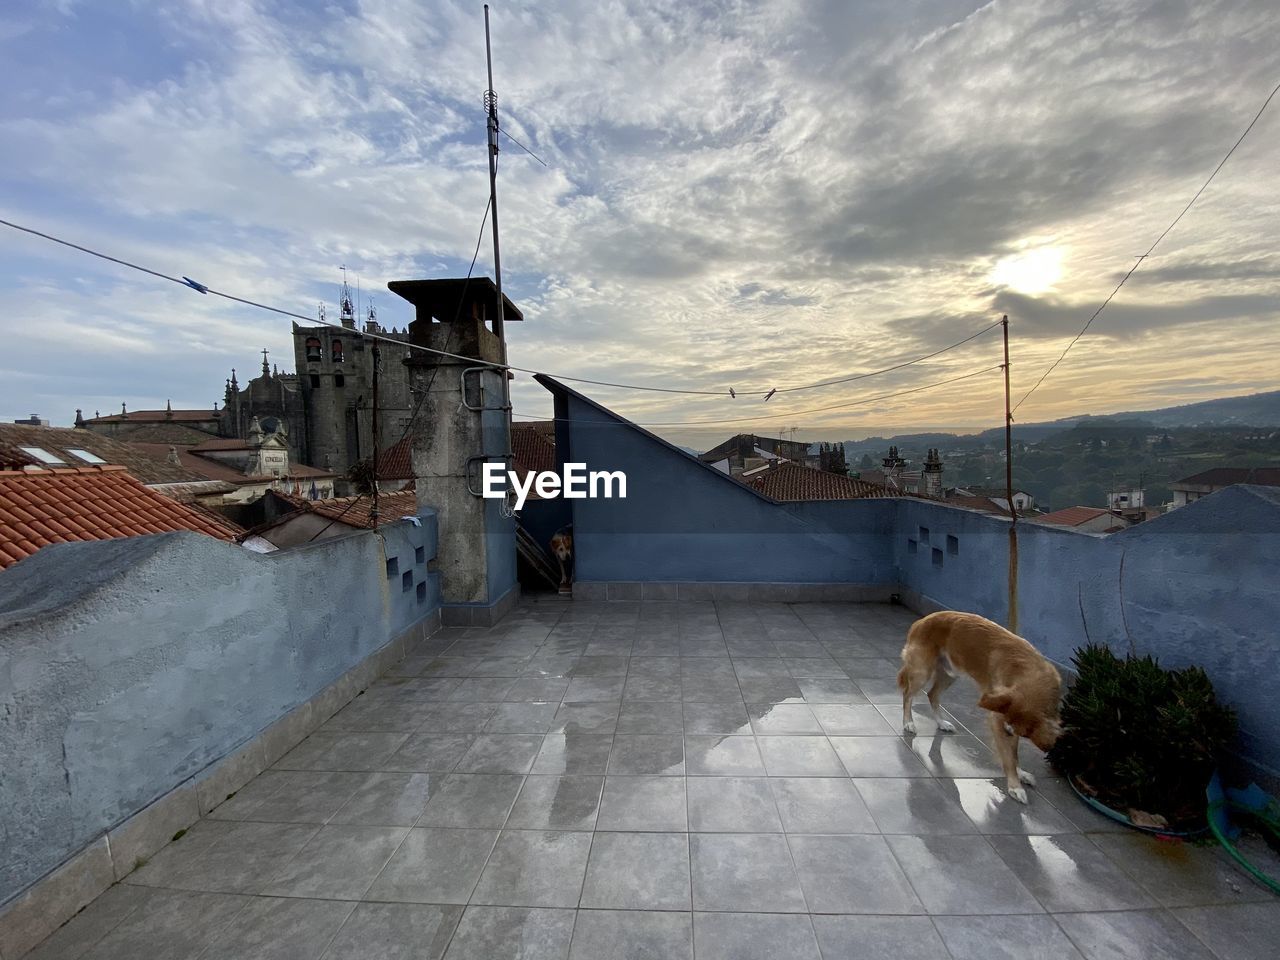 VIEW OF A DOG ON BUILDING